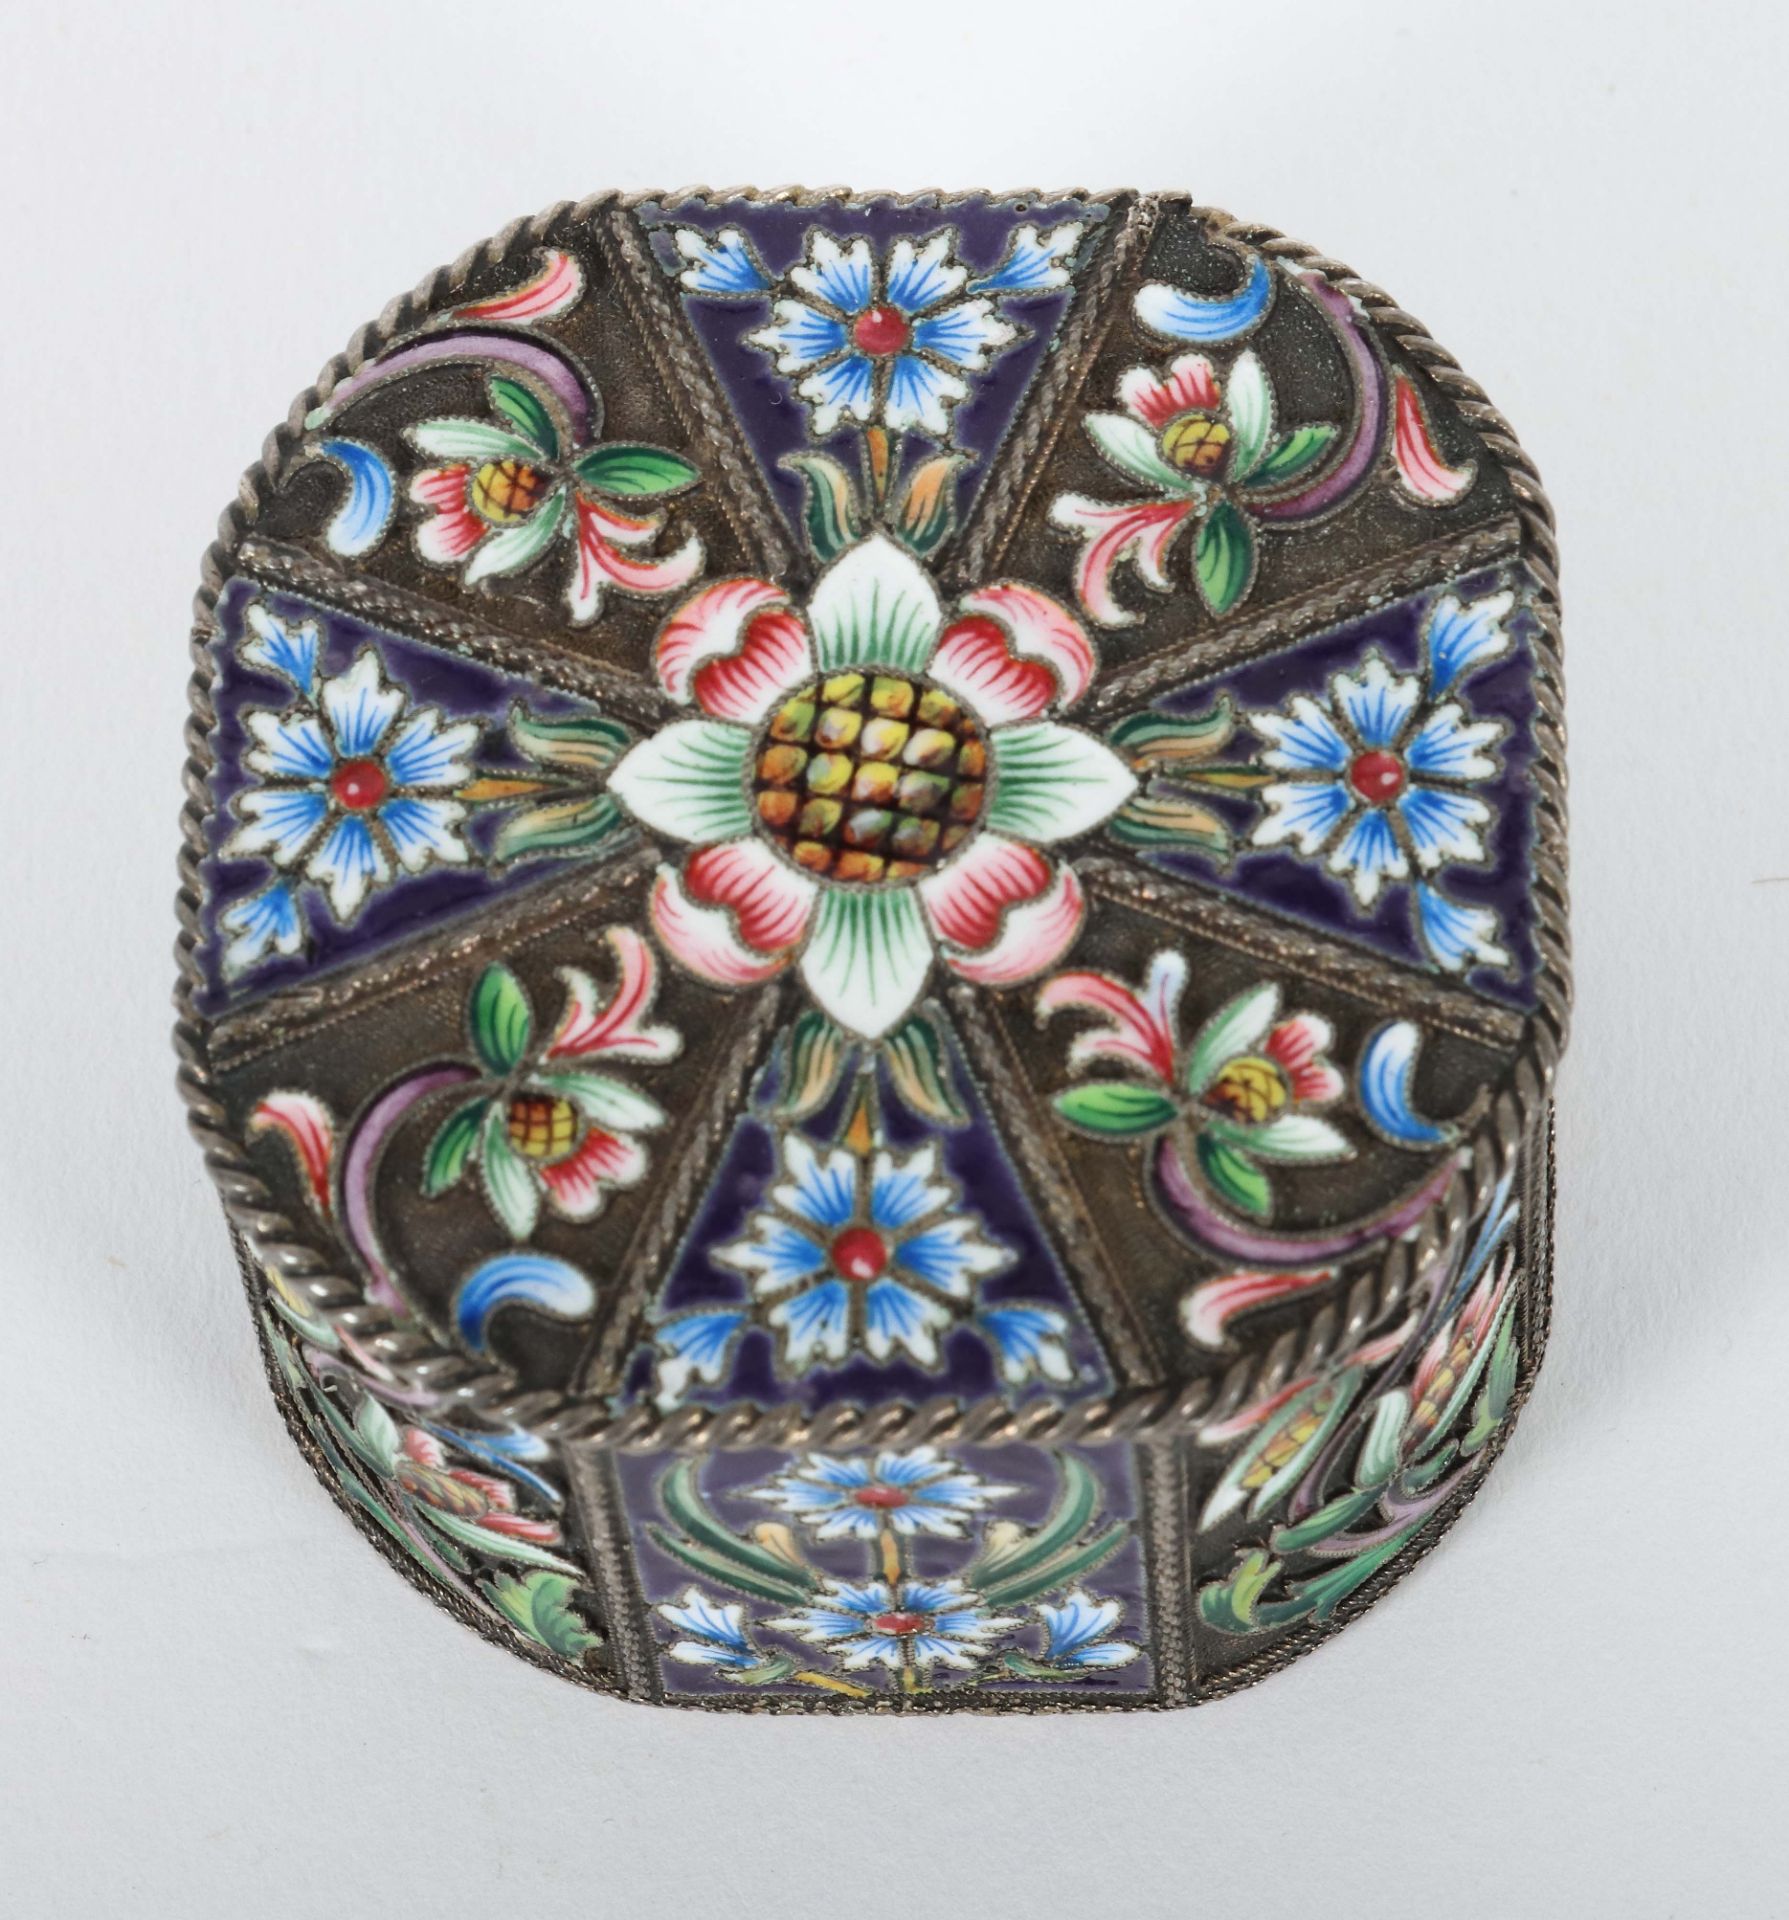 Cloisonné-Emaille-Deckeldose wohl - Image 4 of 6